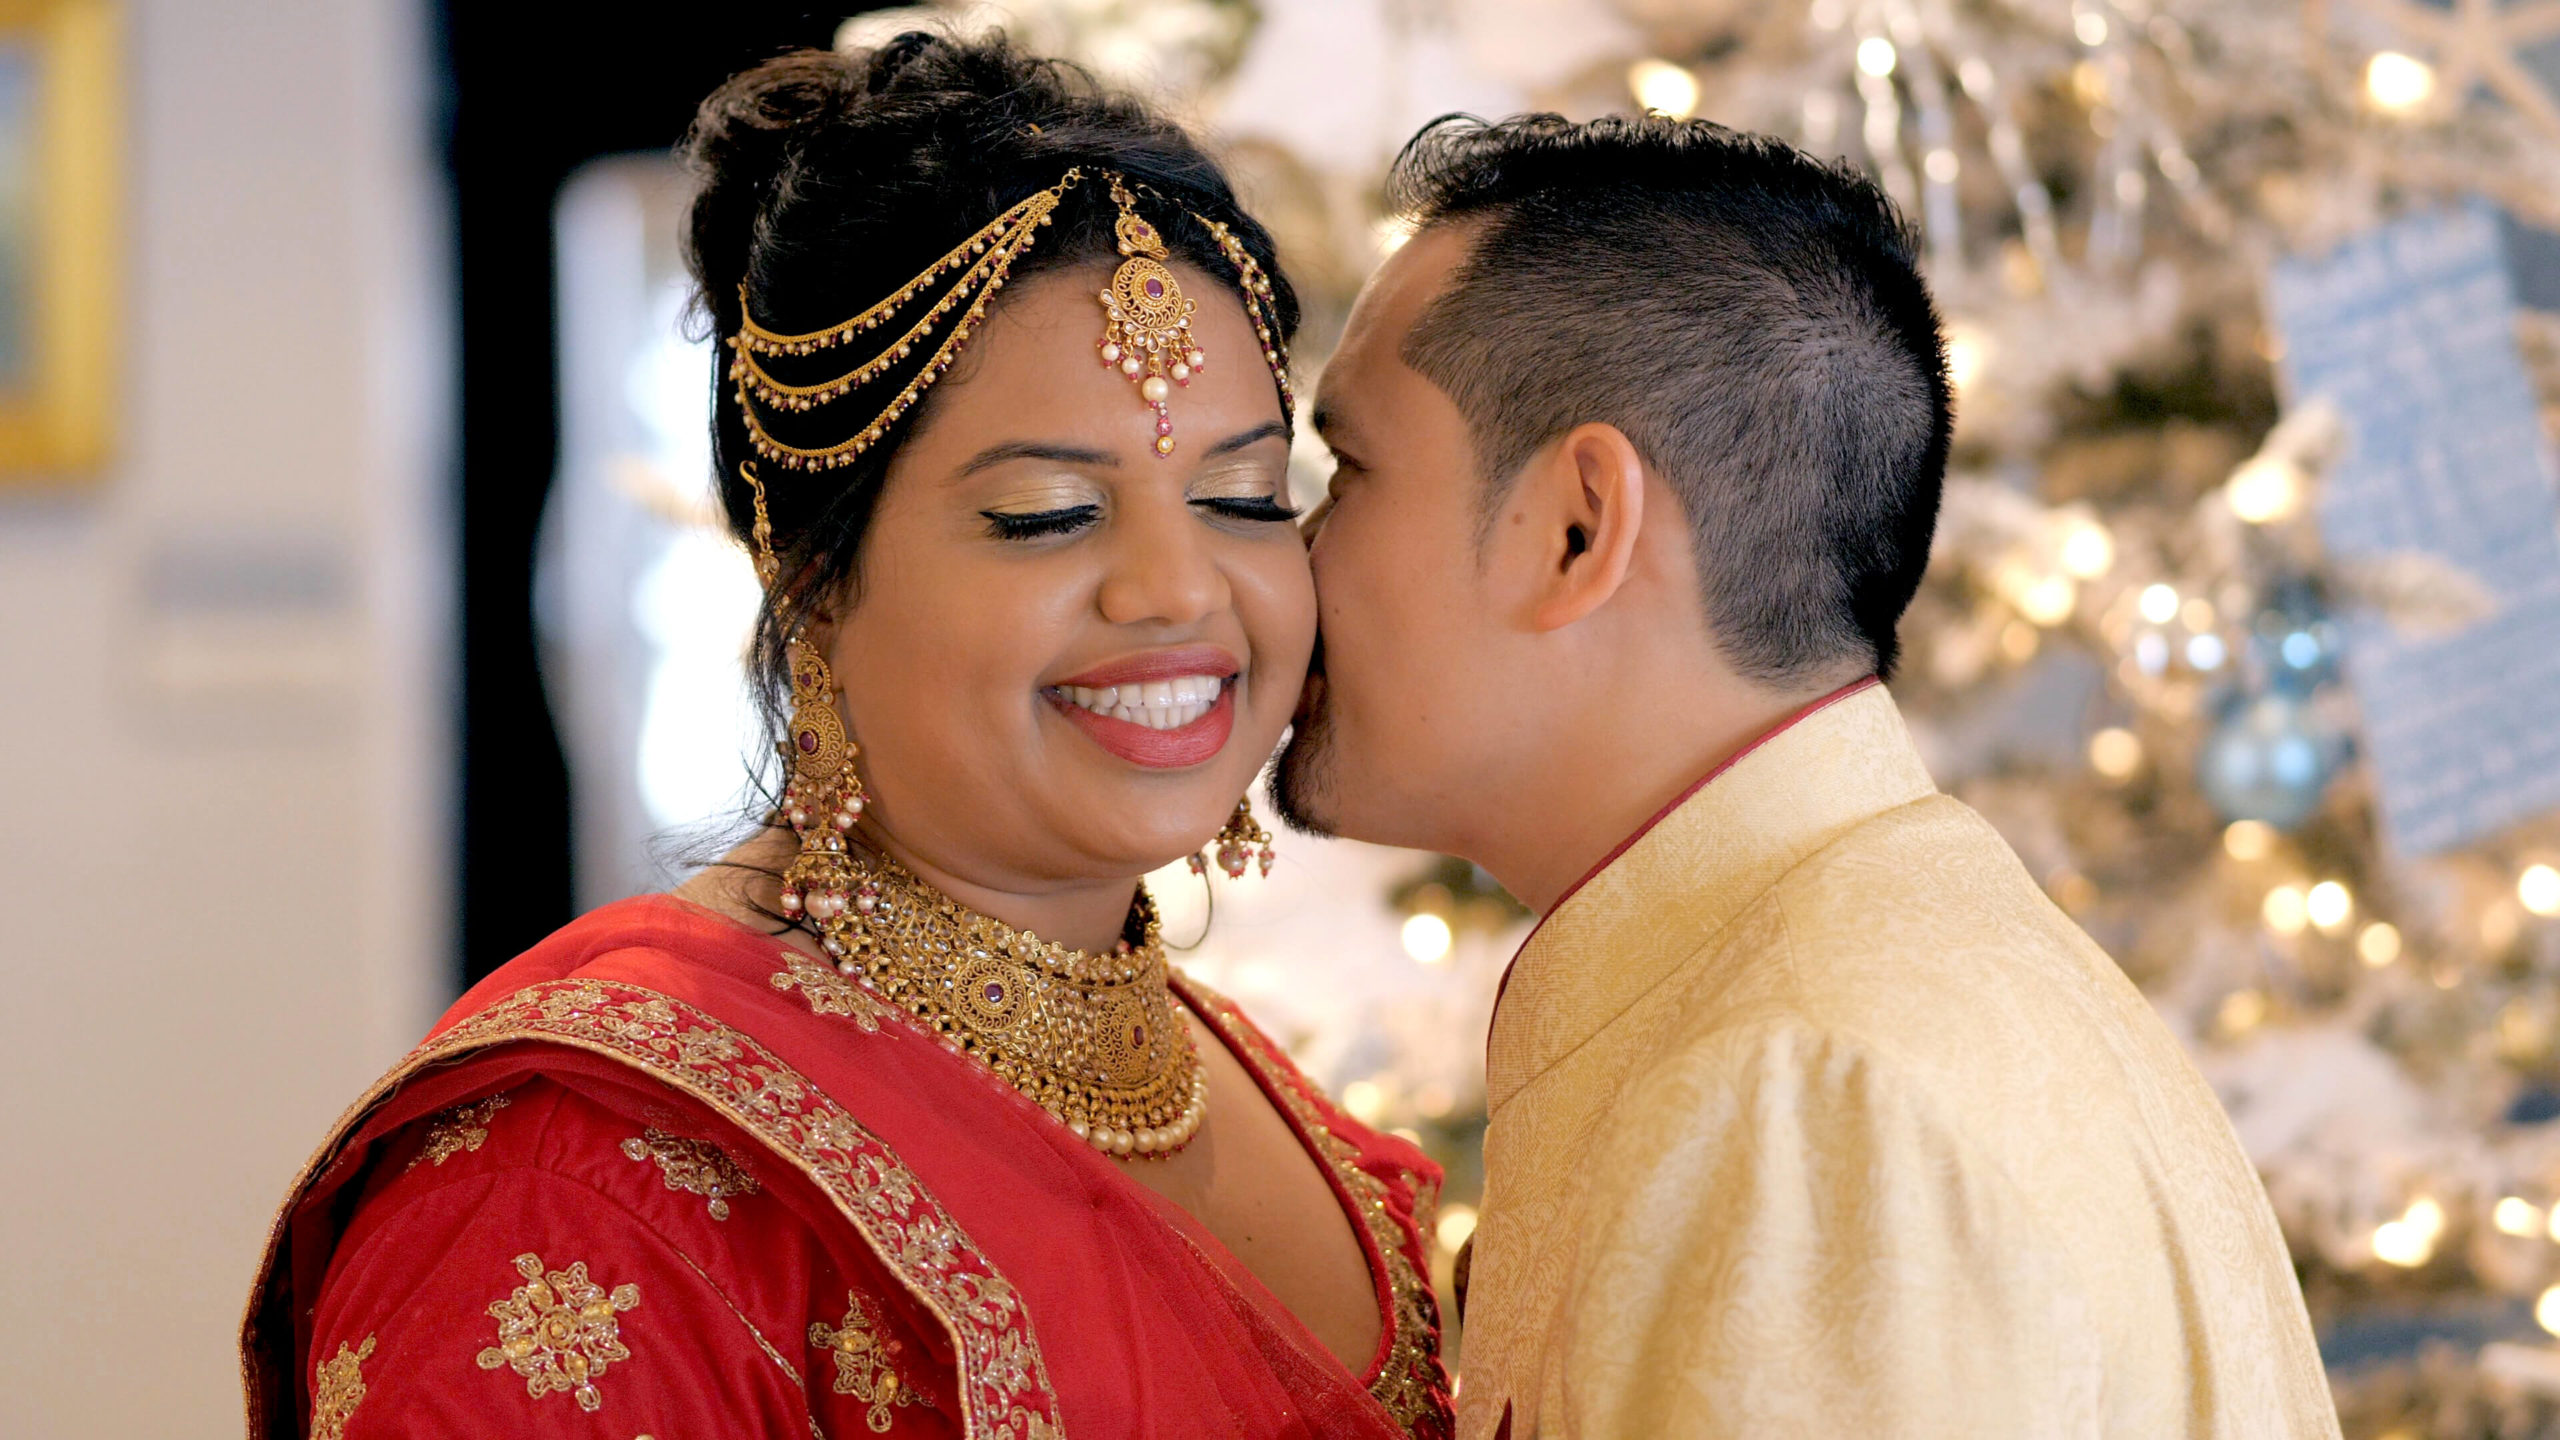 Filipino groom whispering in Indian bride's ear in front of a Christmas tree